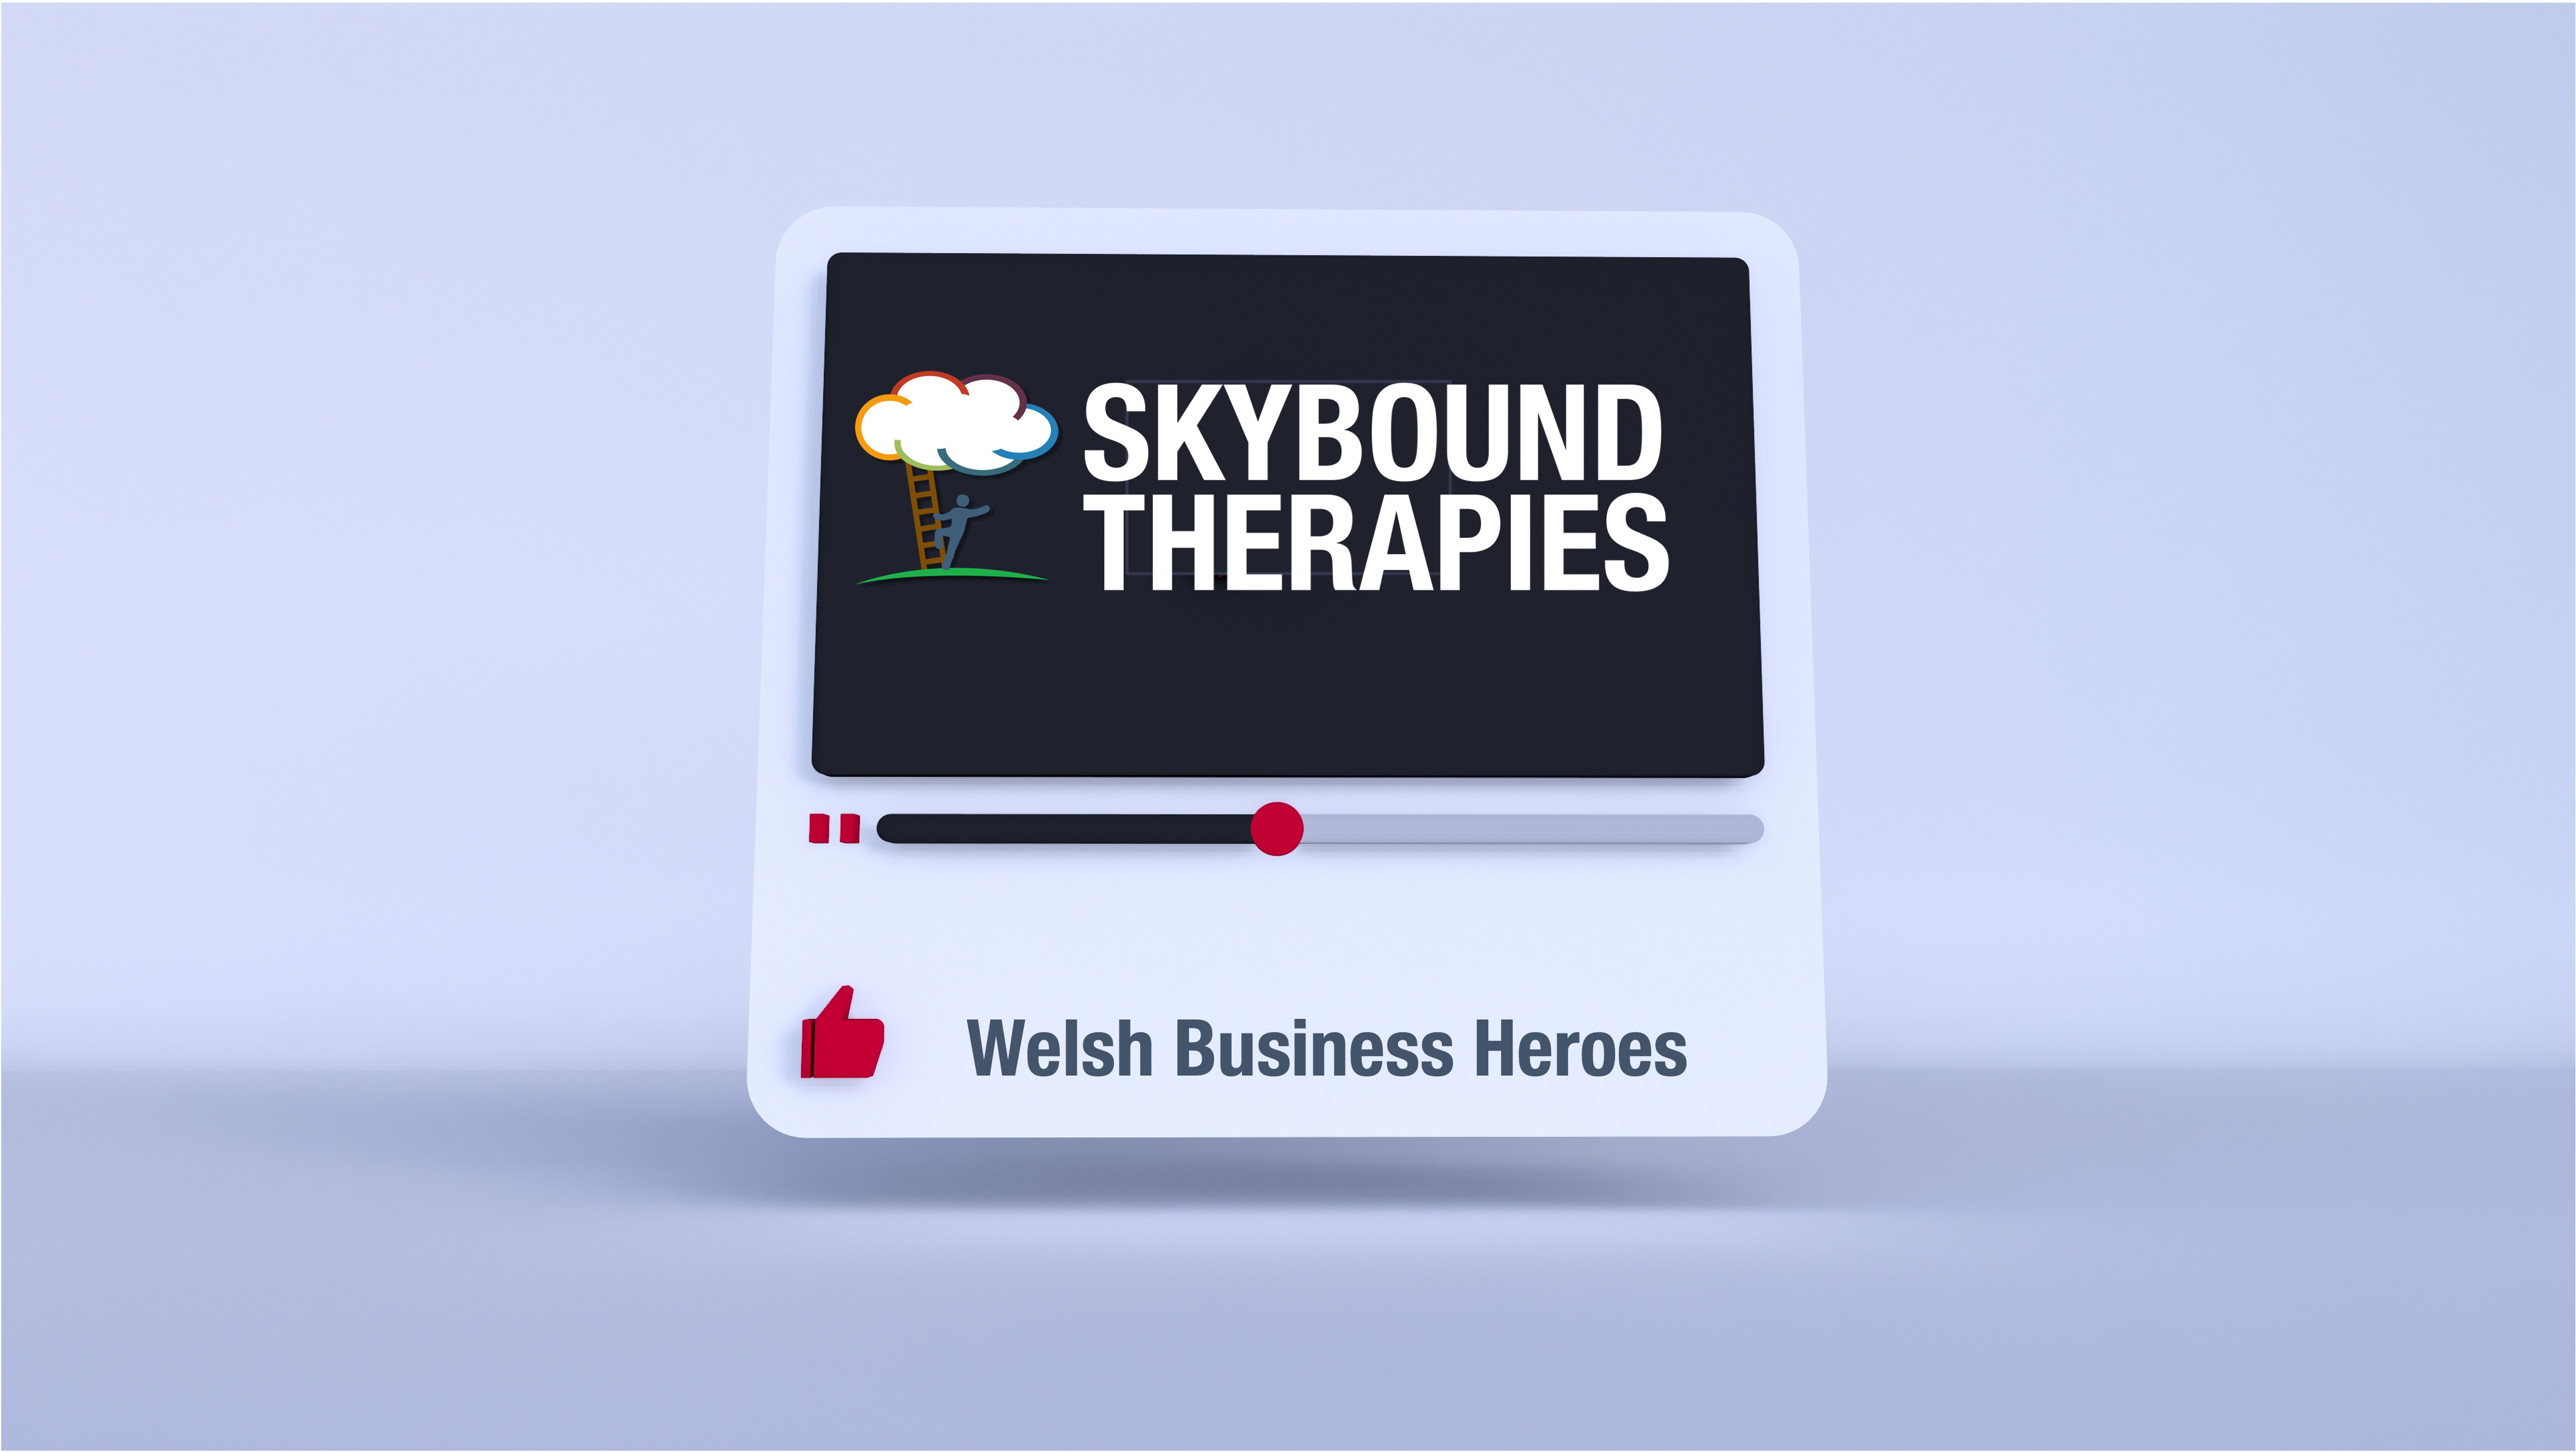 Skybound hits the Headlines as Welsh Business Heroes for April!